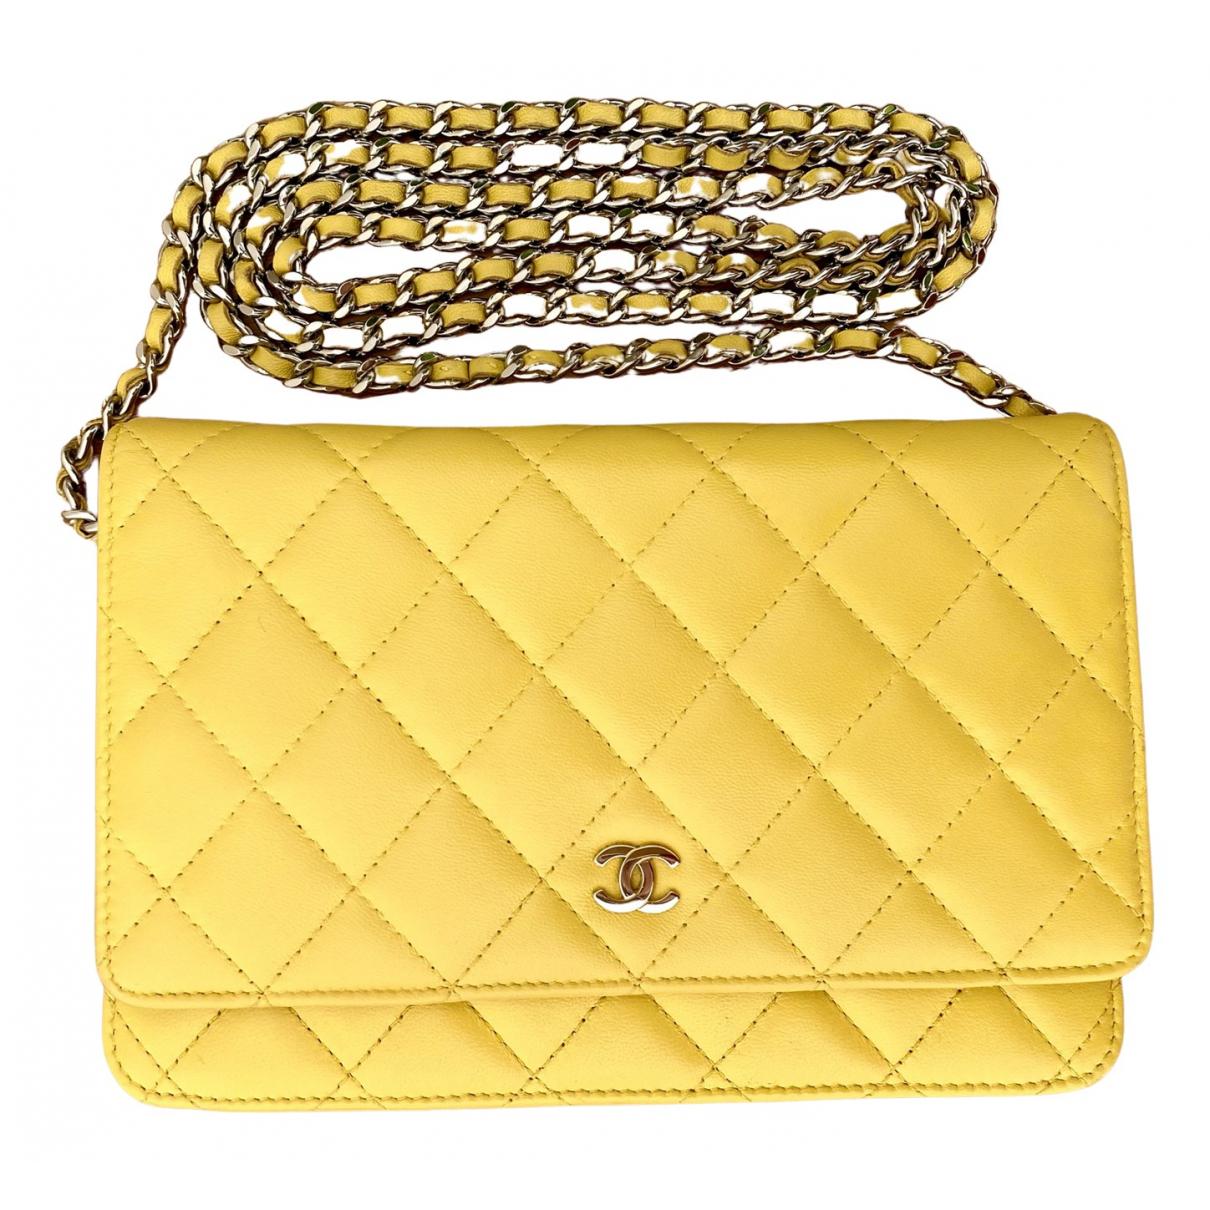 CHANEL Chain Long Wallet Caviar Skin Leather Yellow A48654 Purse 90193752